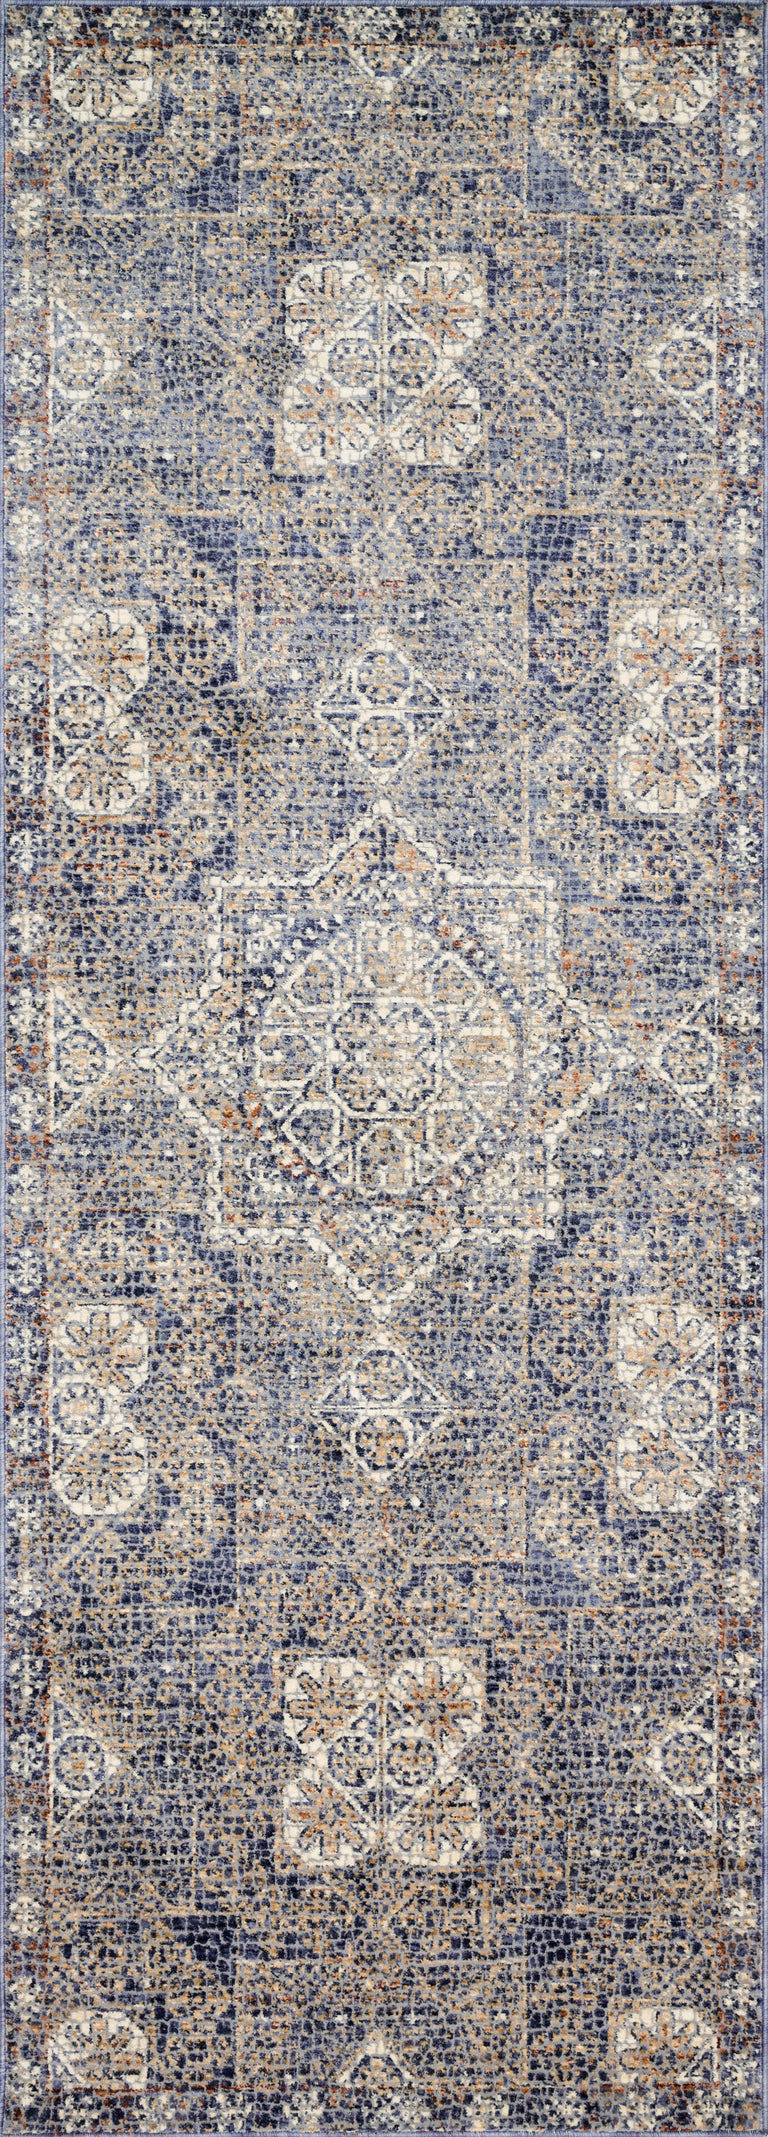 Loloi Rugs Porcia Collection Rug in Blue, Blue - 9'6" x 9'6", PORCPB-02BBBB960R